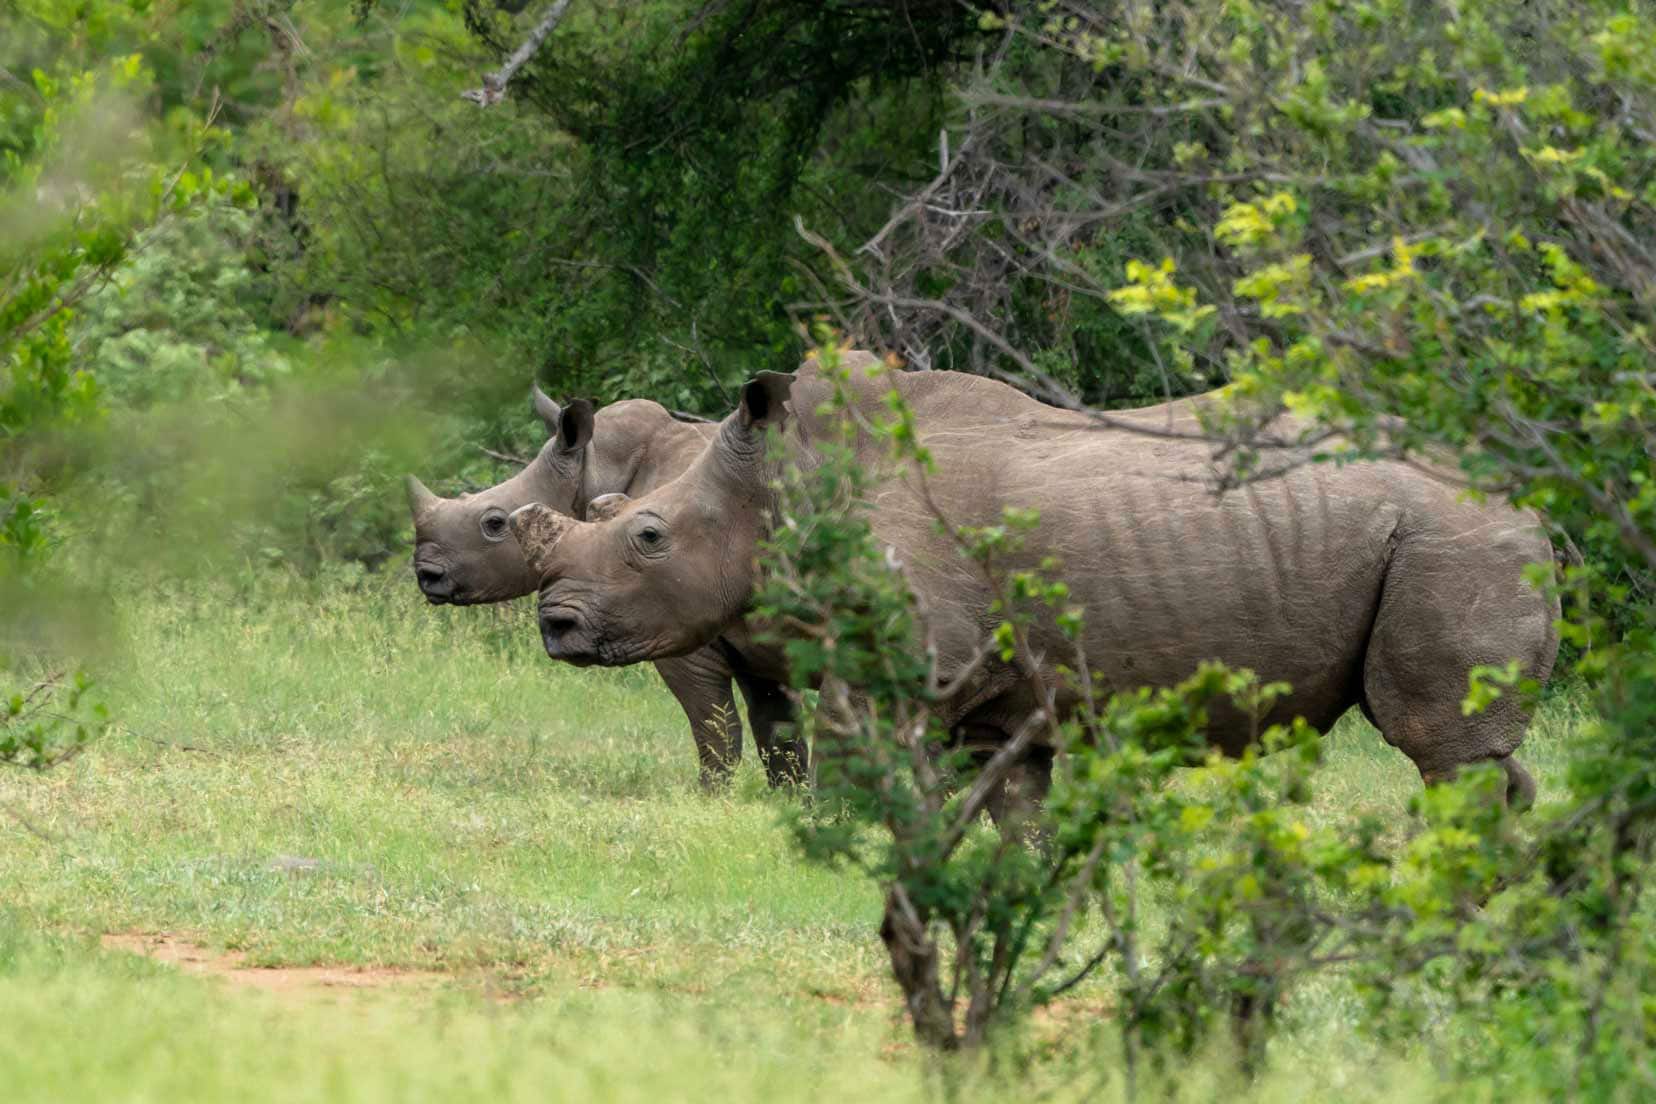 two rhinos - a female and her smaller calf. The female has a shaved off horn and they are stood amongst bushes